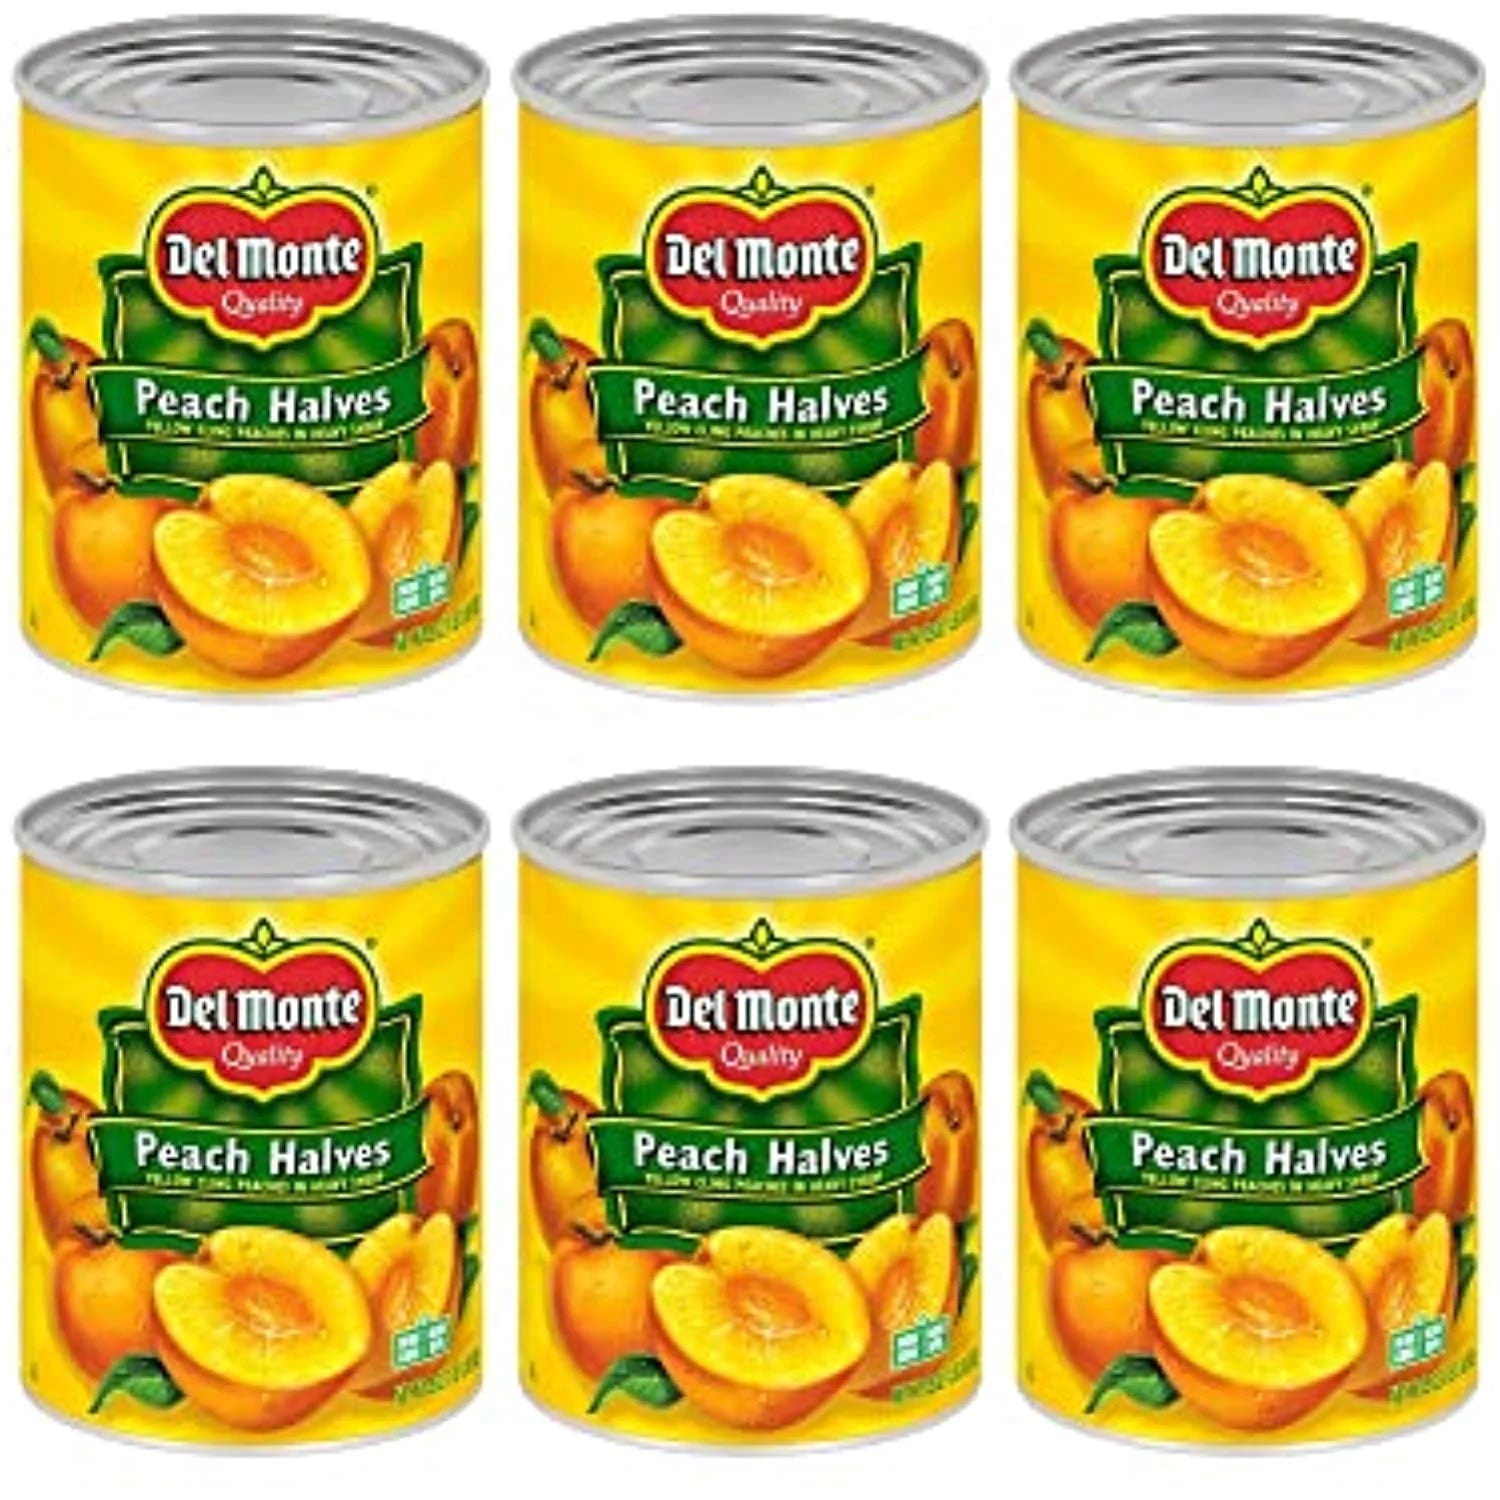 Monte Yellow Cling Peach Halves in Heavy Syrup, Canned Fruit, 29 Oz Can 1.81 Pound (Pack of 6)